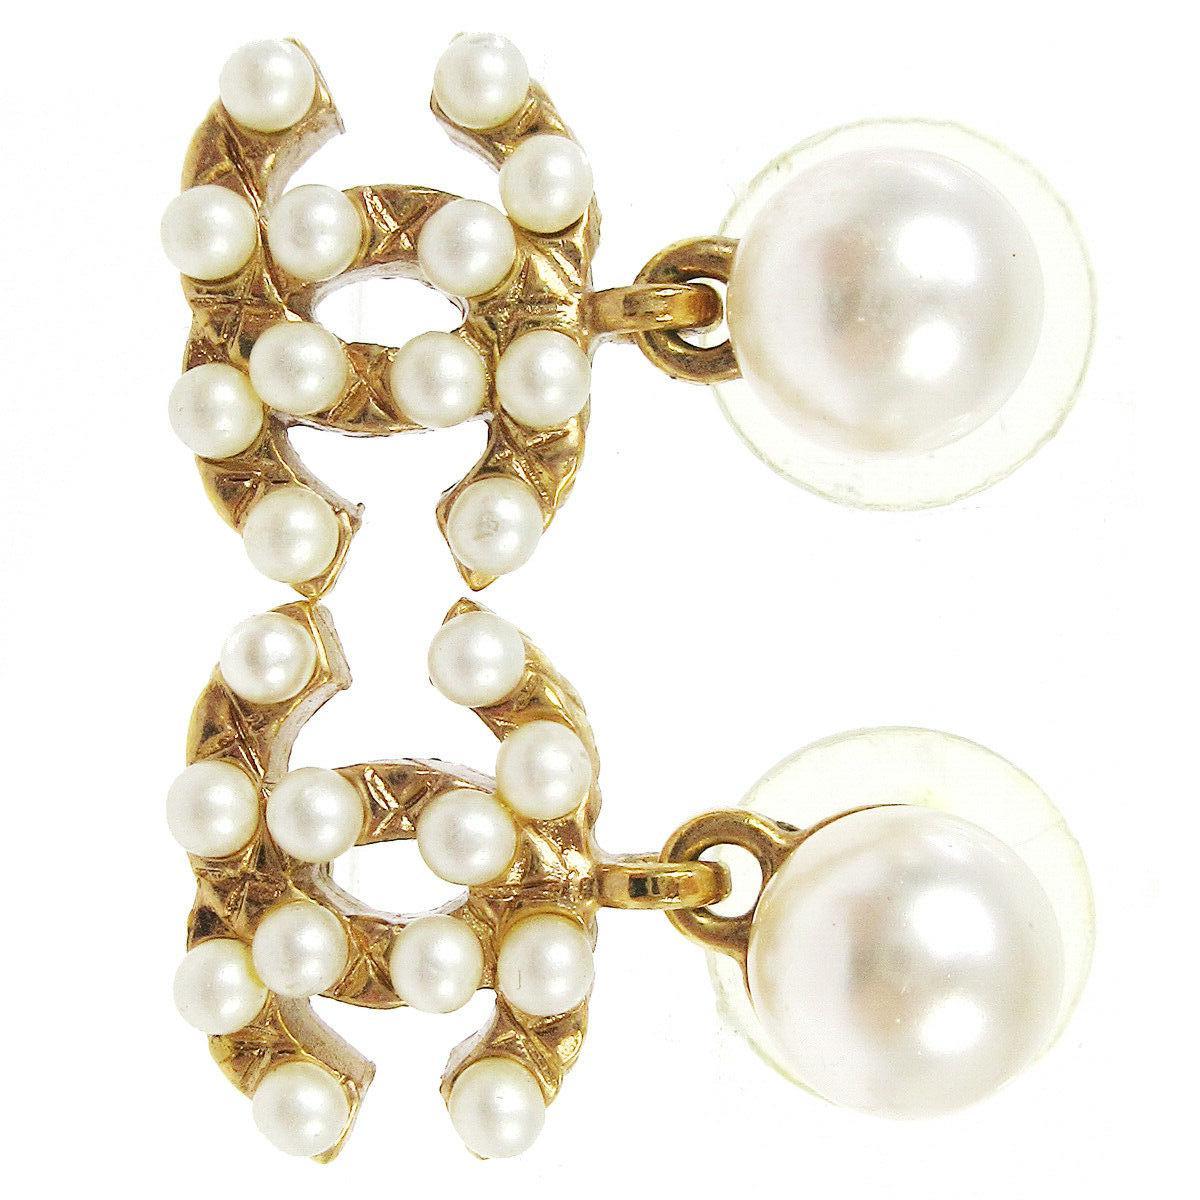 Chanel Gold Pearl Charm CC Small Pierced Evening Dangle Drop Earrings

Faux Pearl
Metal
Gold tone hardware
For Pierced Ears
Made in France
Measures 0.50